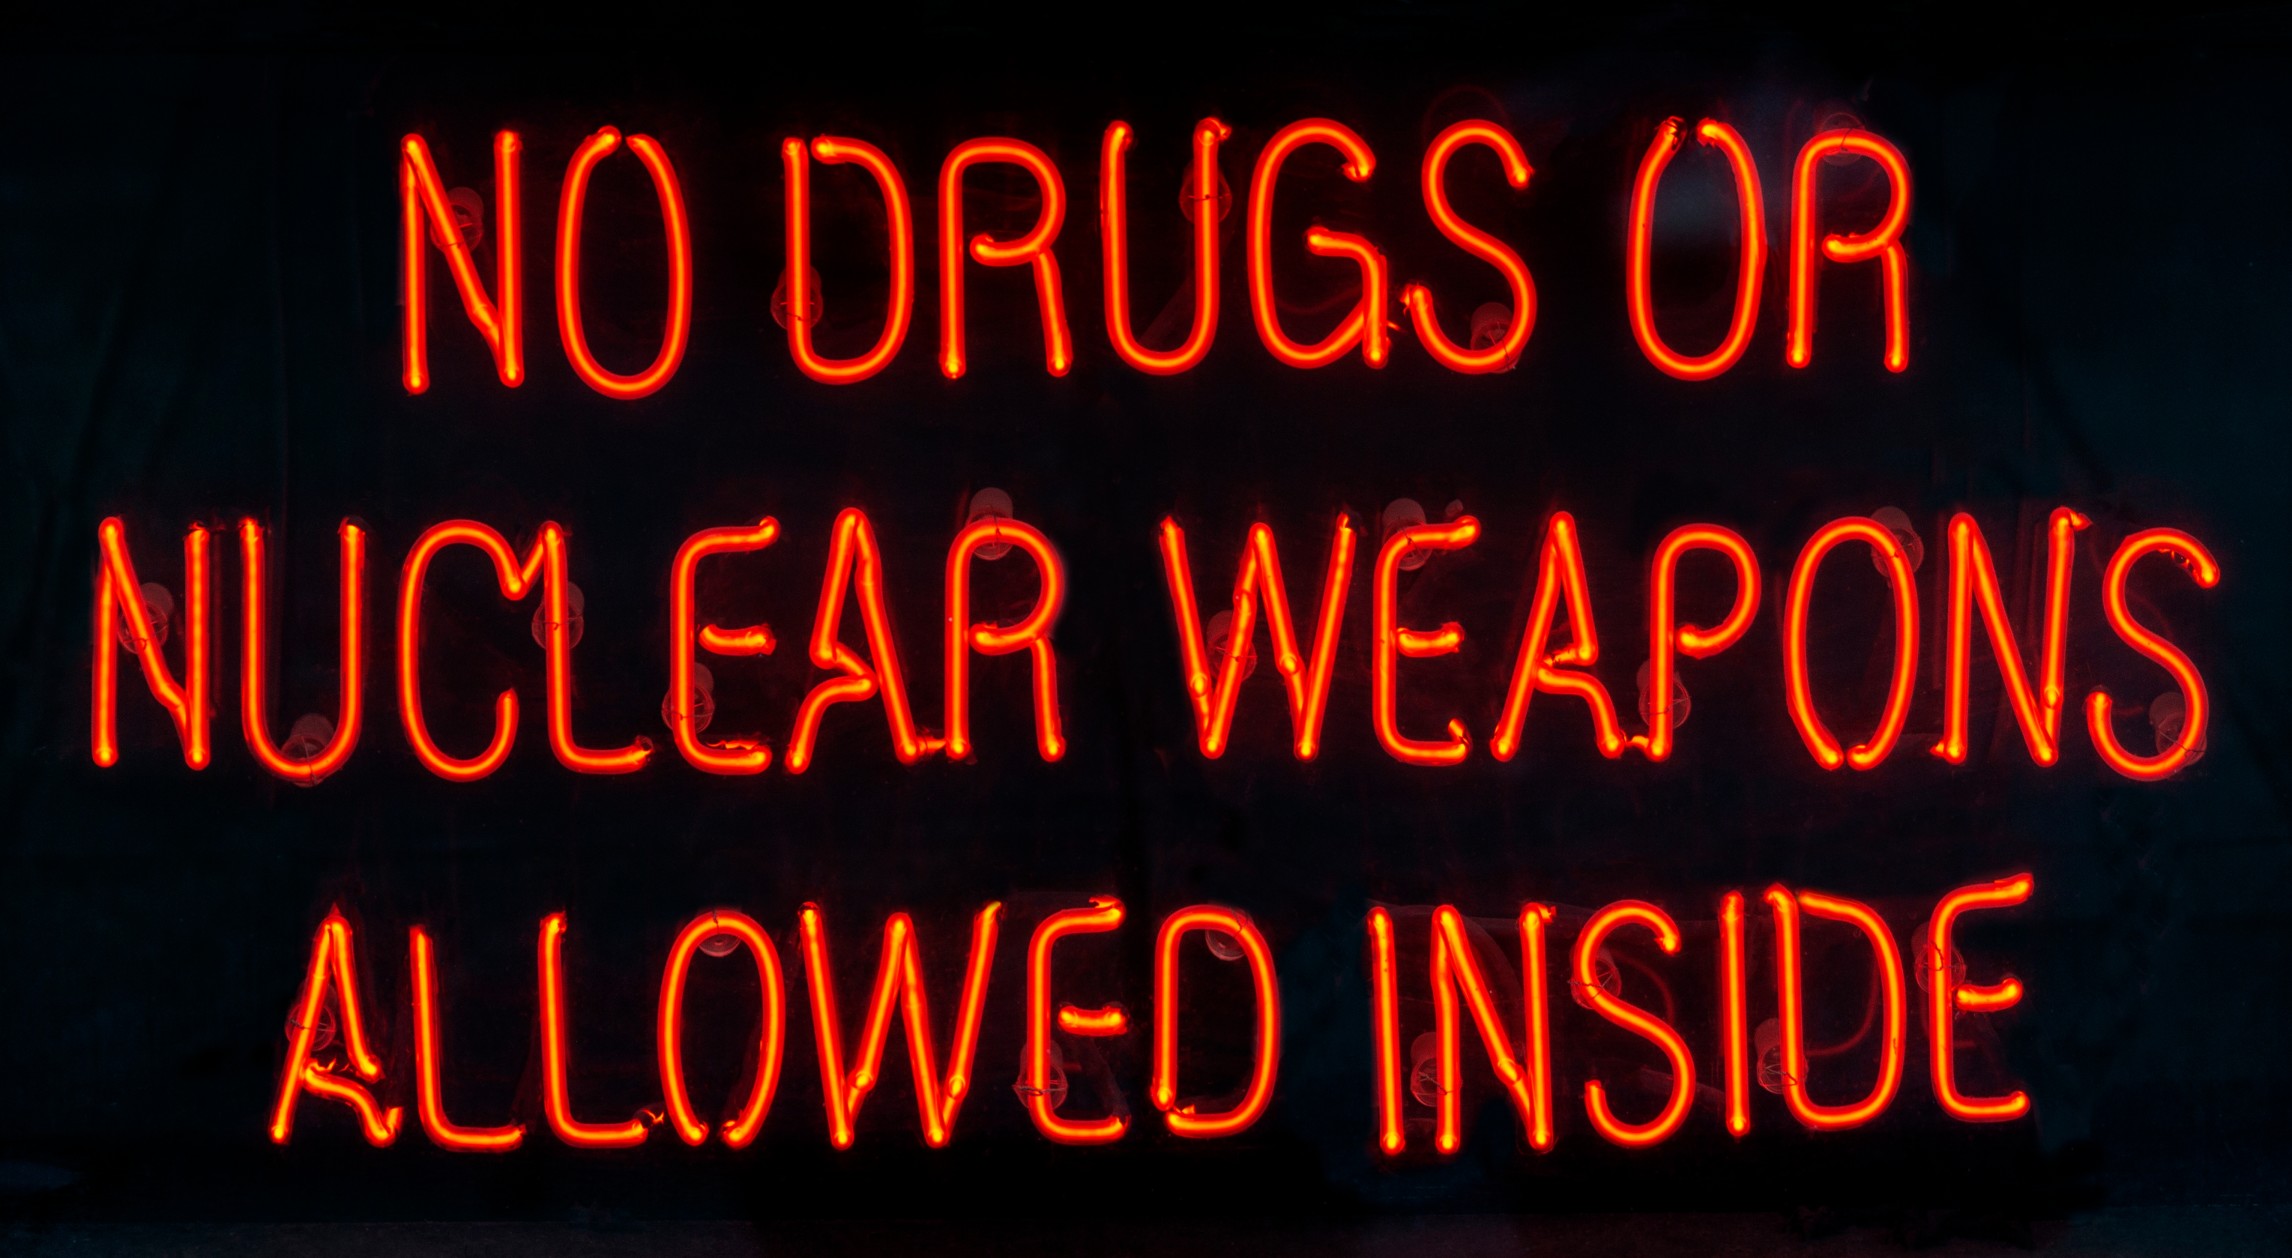 Neon sign that says, "No drugs or nuclear weapons allowed inside."